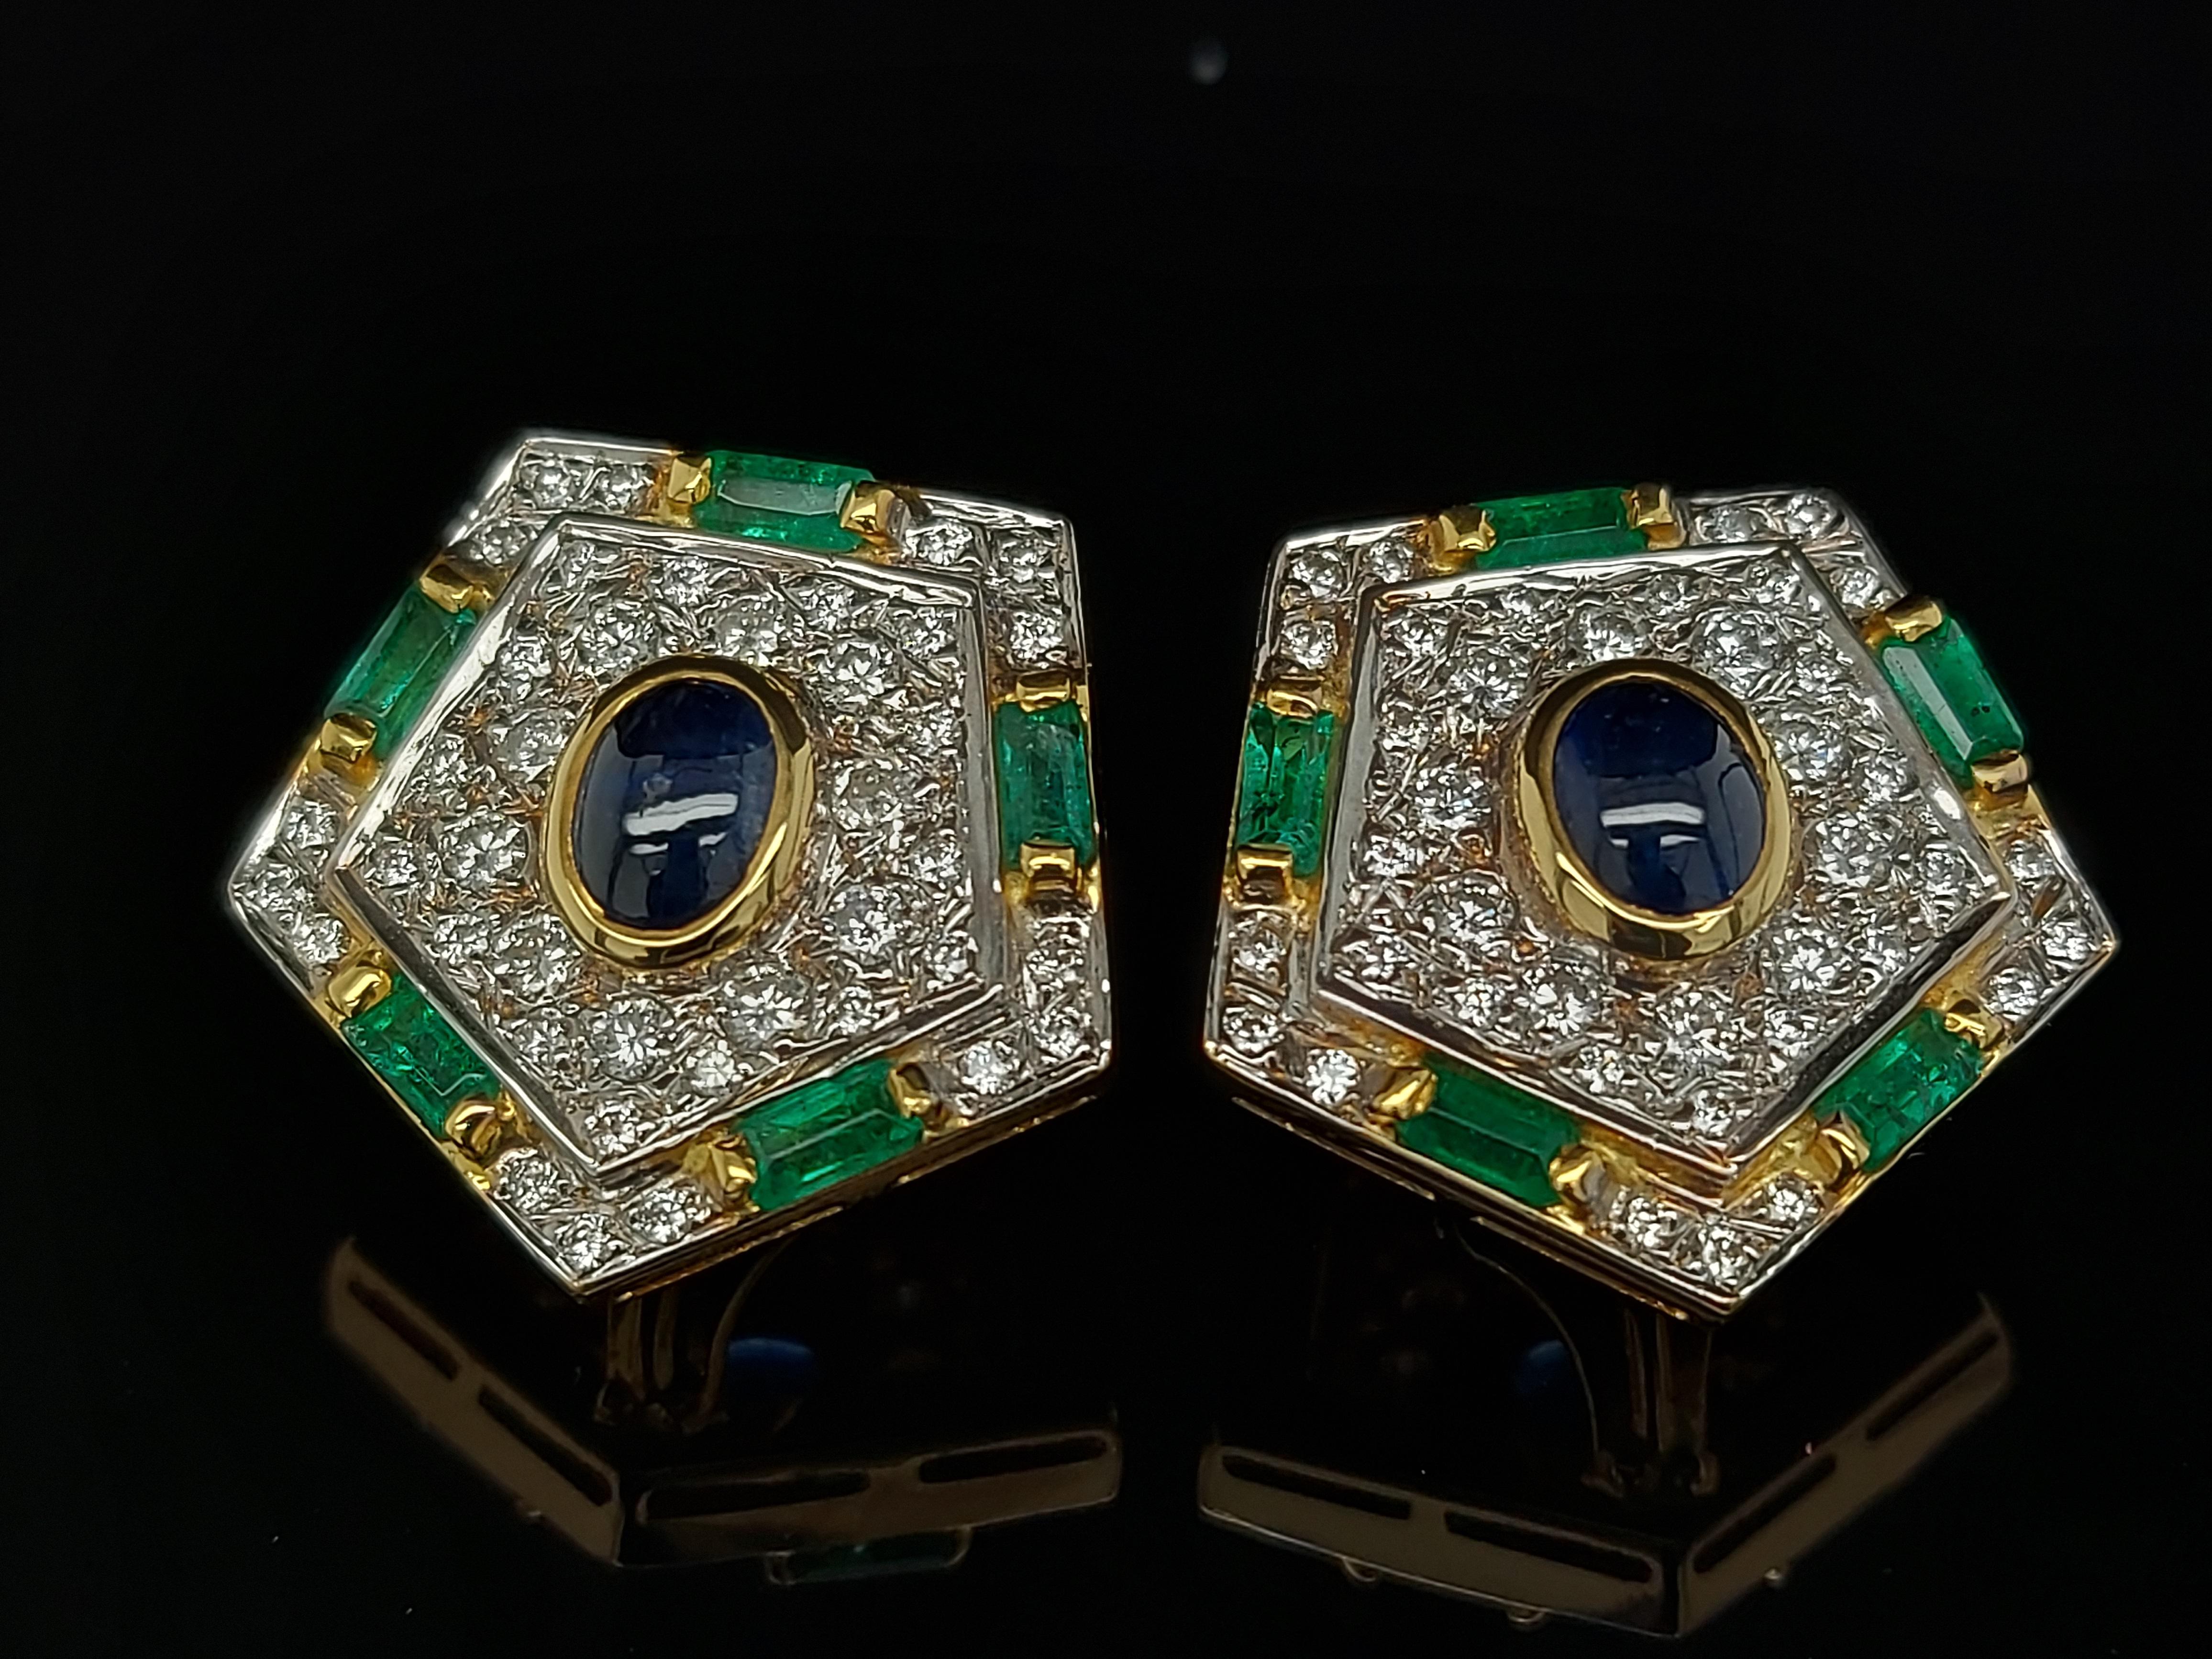 Luxurious Gold Clip-On Earrings With Diamonds, Emerald and Cabochon Sapphire For Sale 1